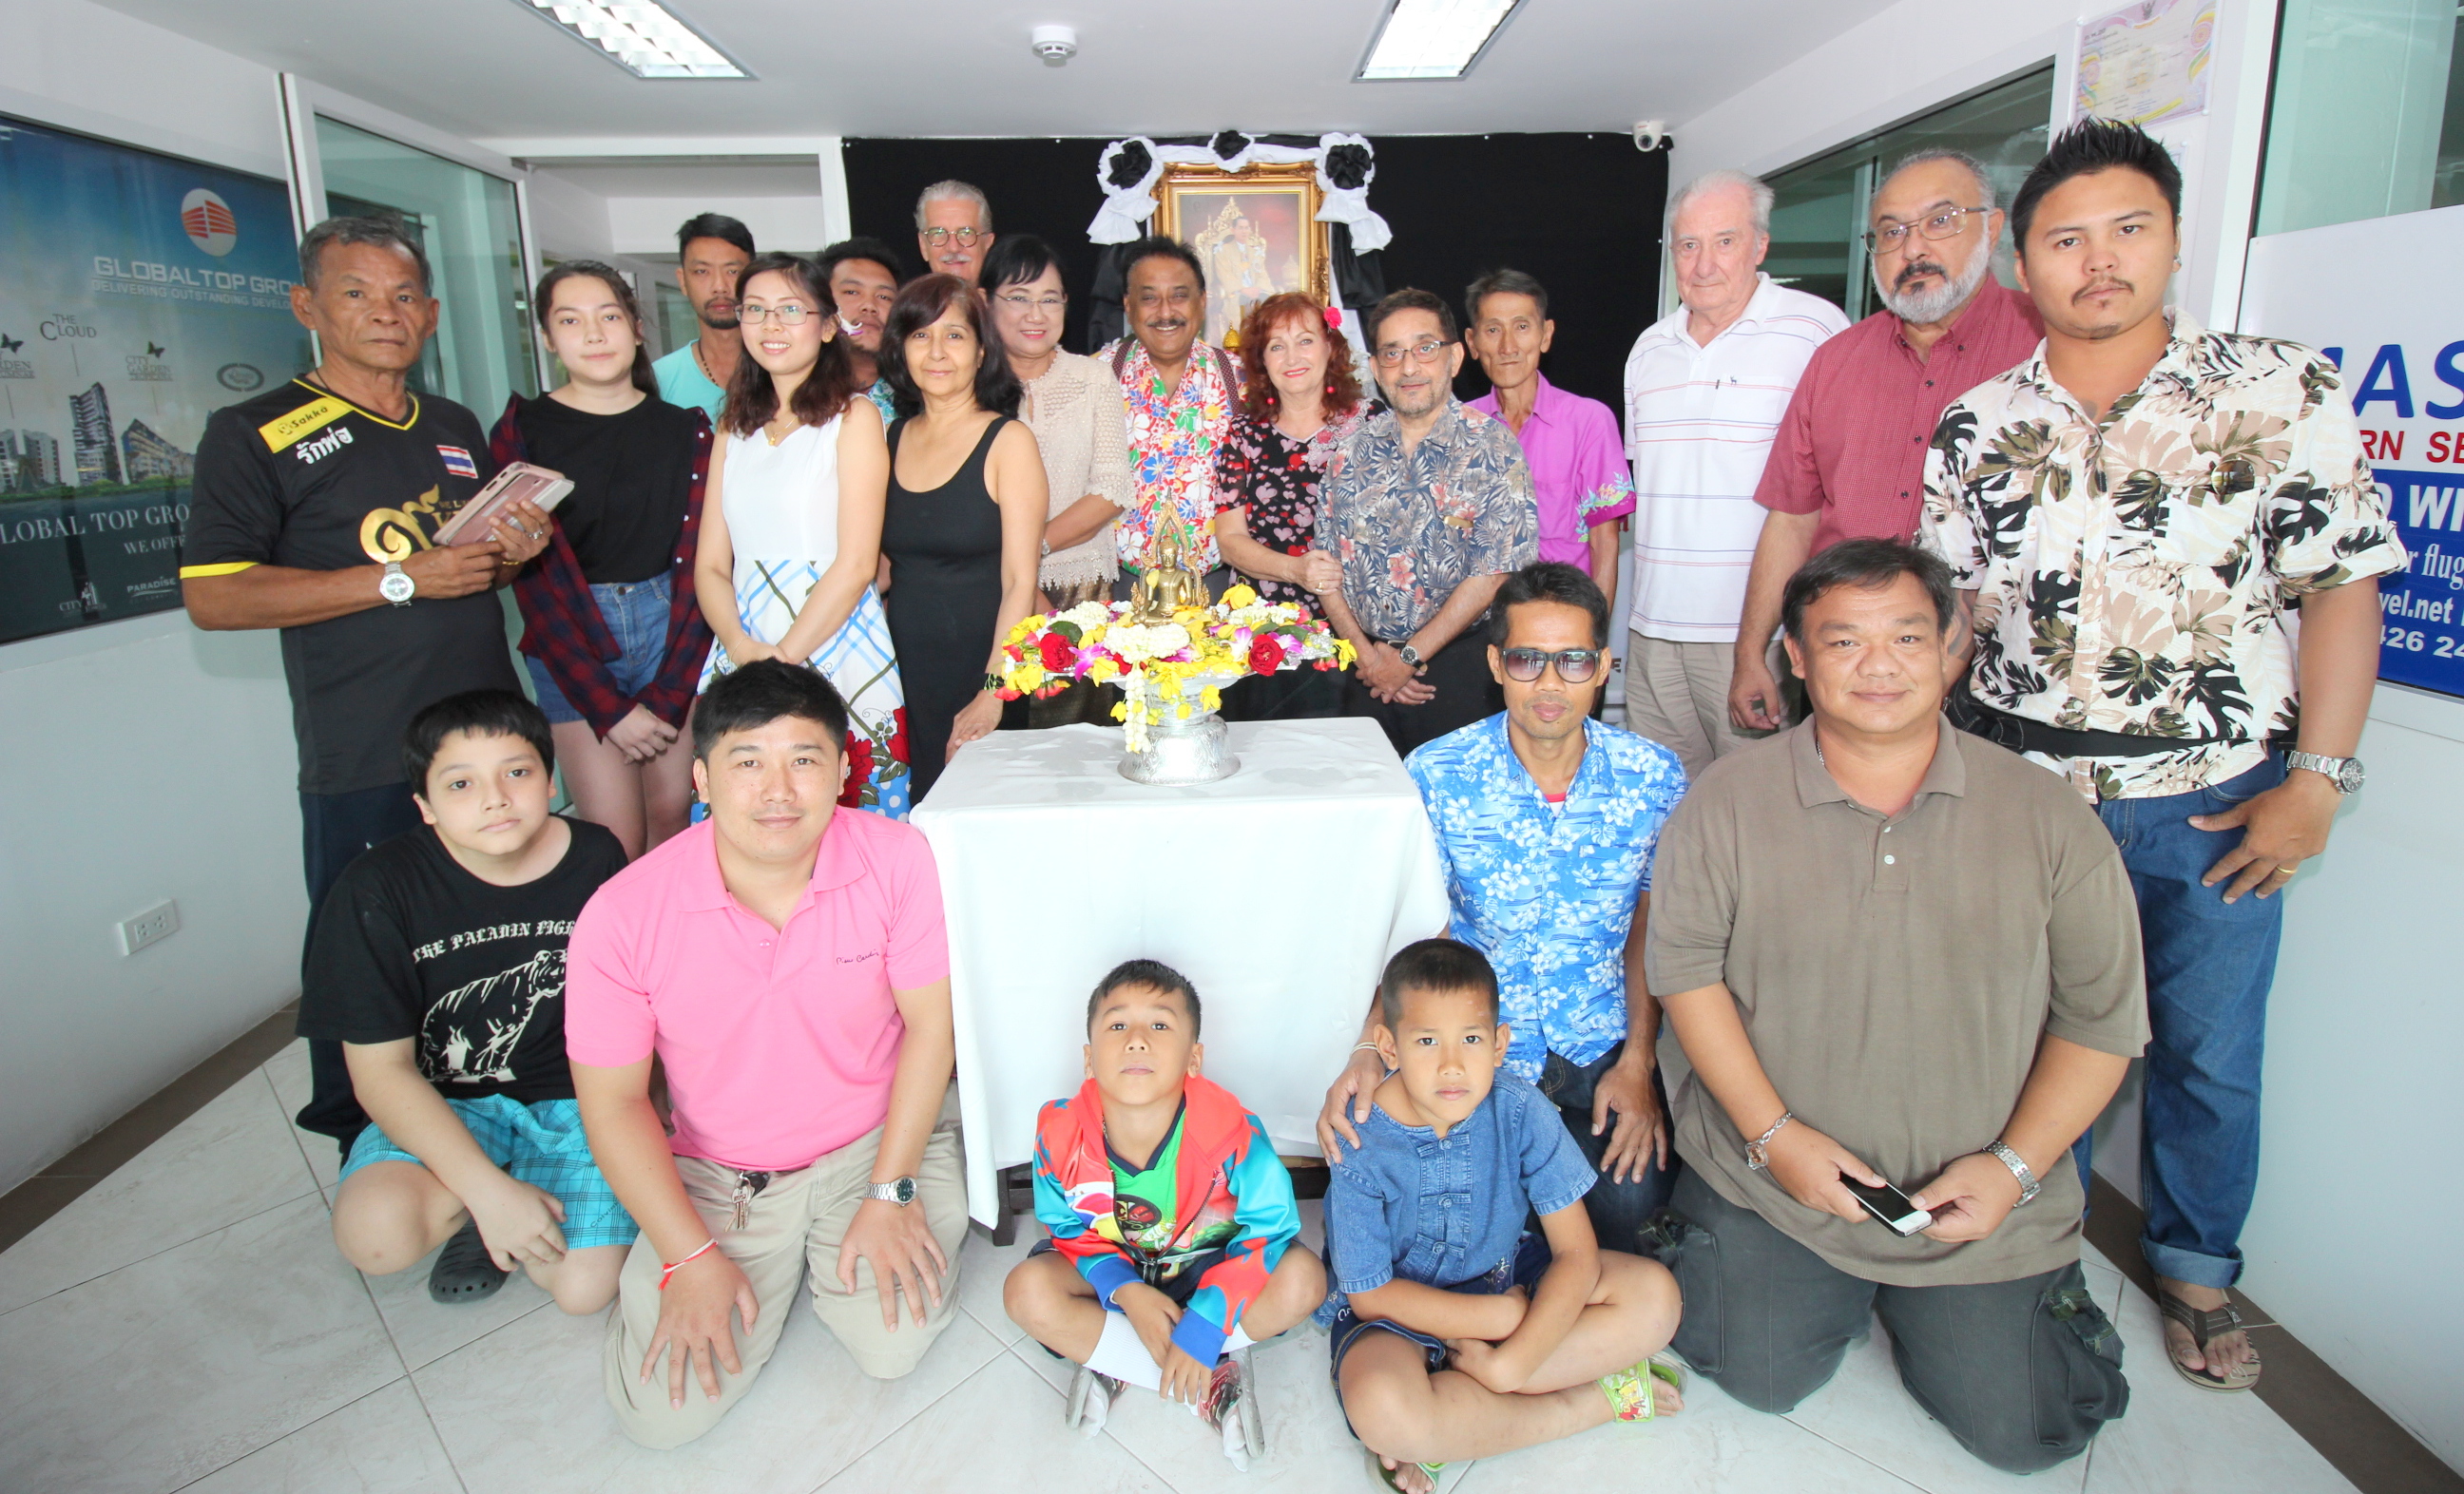 The Pattaya Mail familygather for a group photograph after the ceremonies.